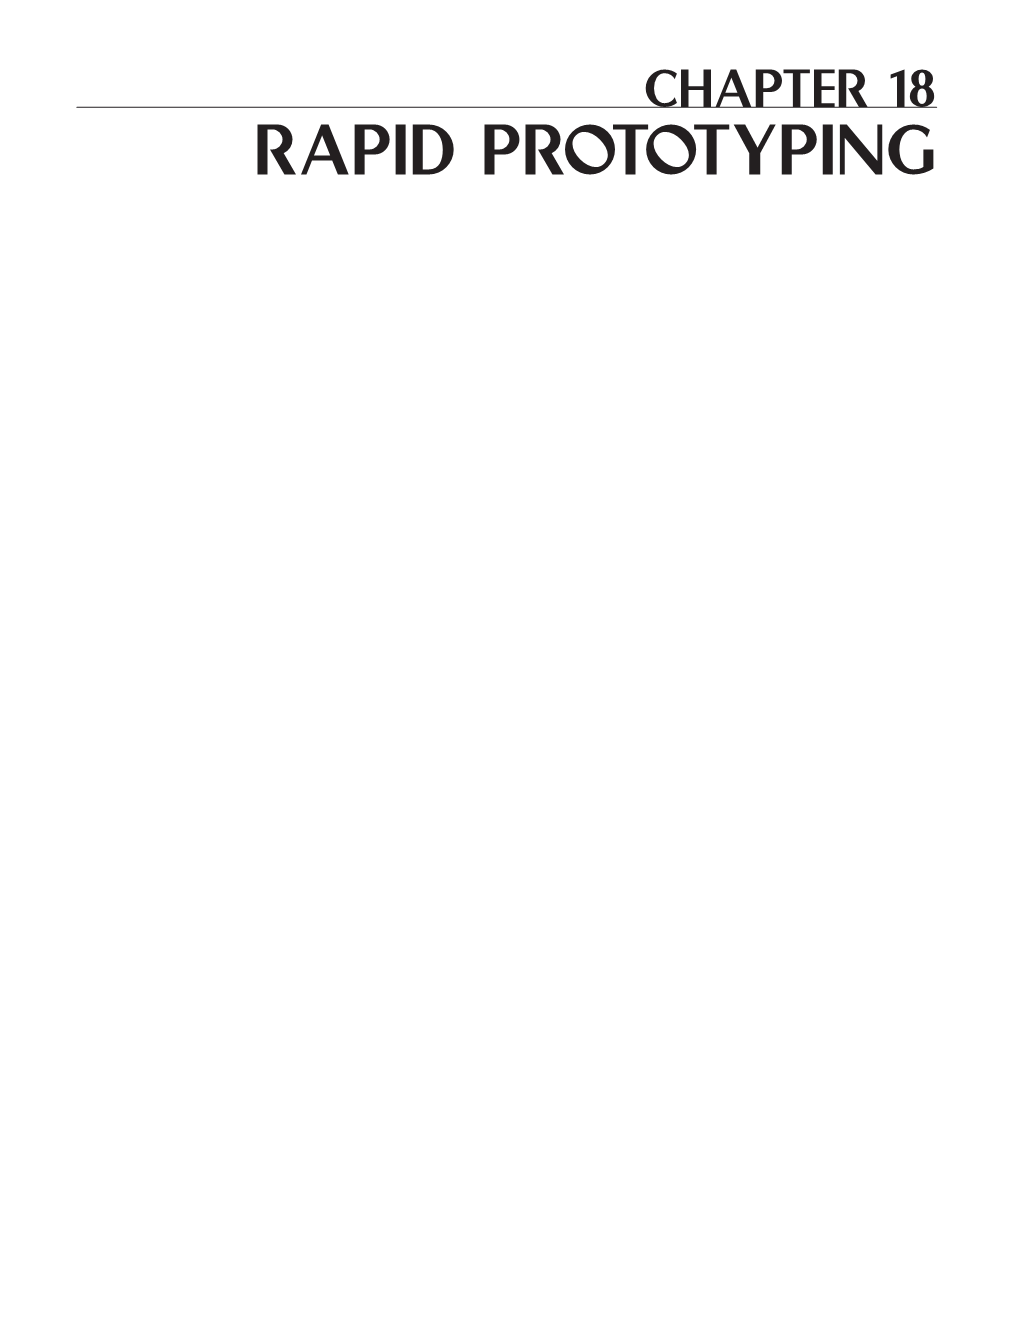 Rapid Prototyping Rapid Prototyping Focuses on Building Functional Parts